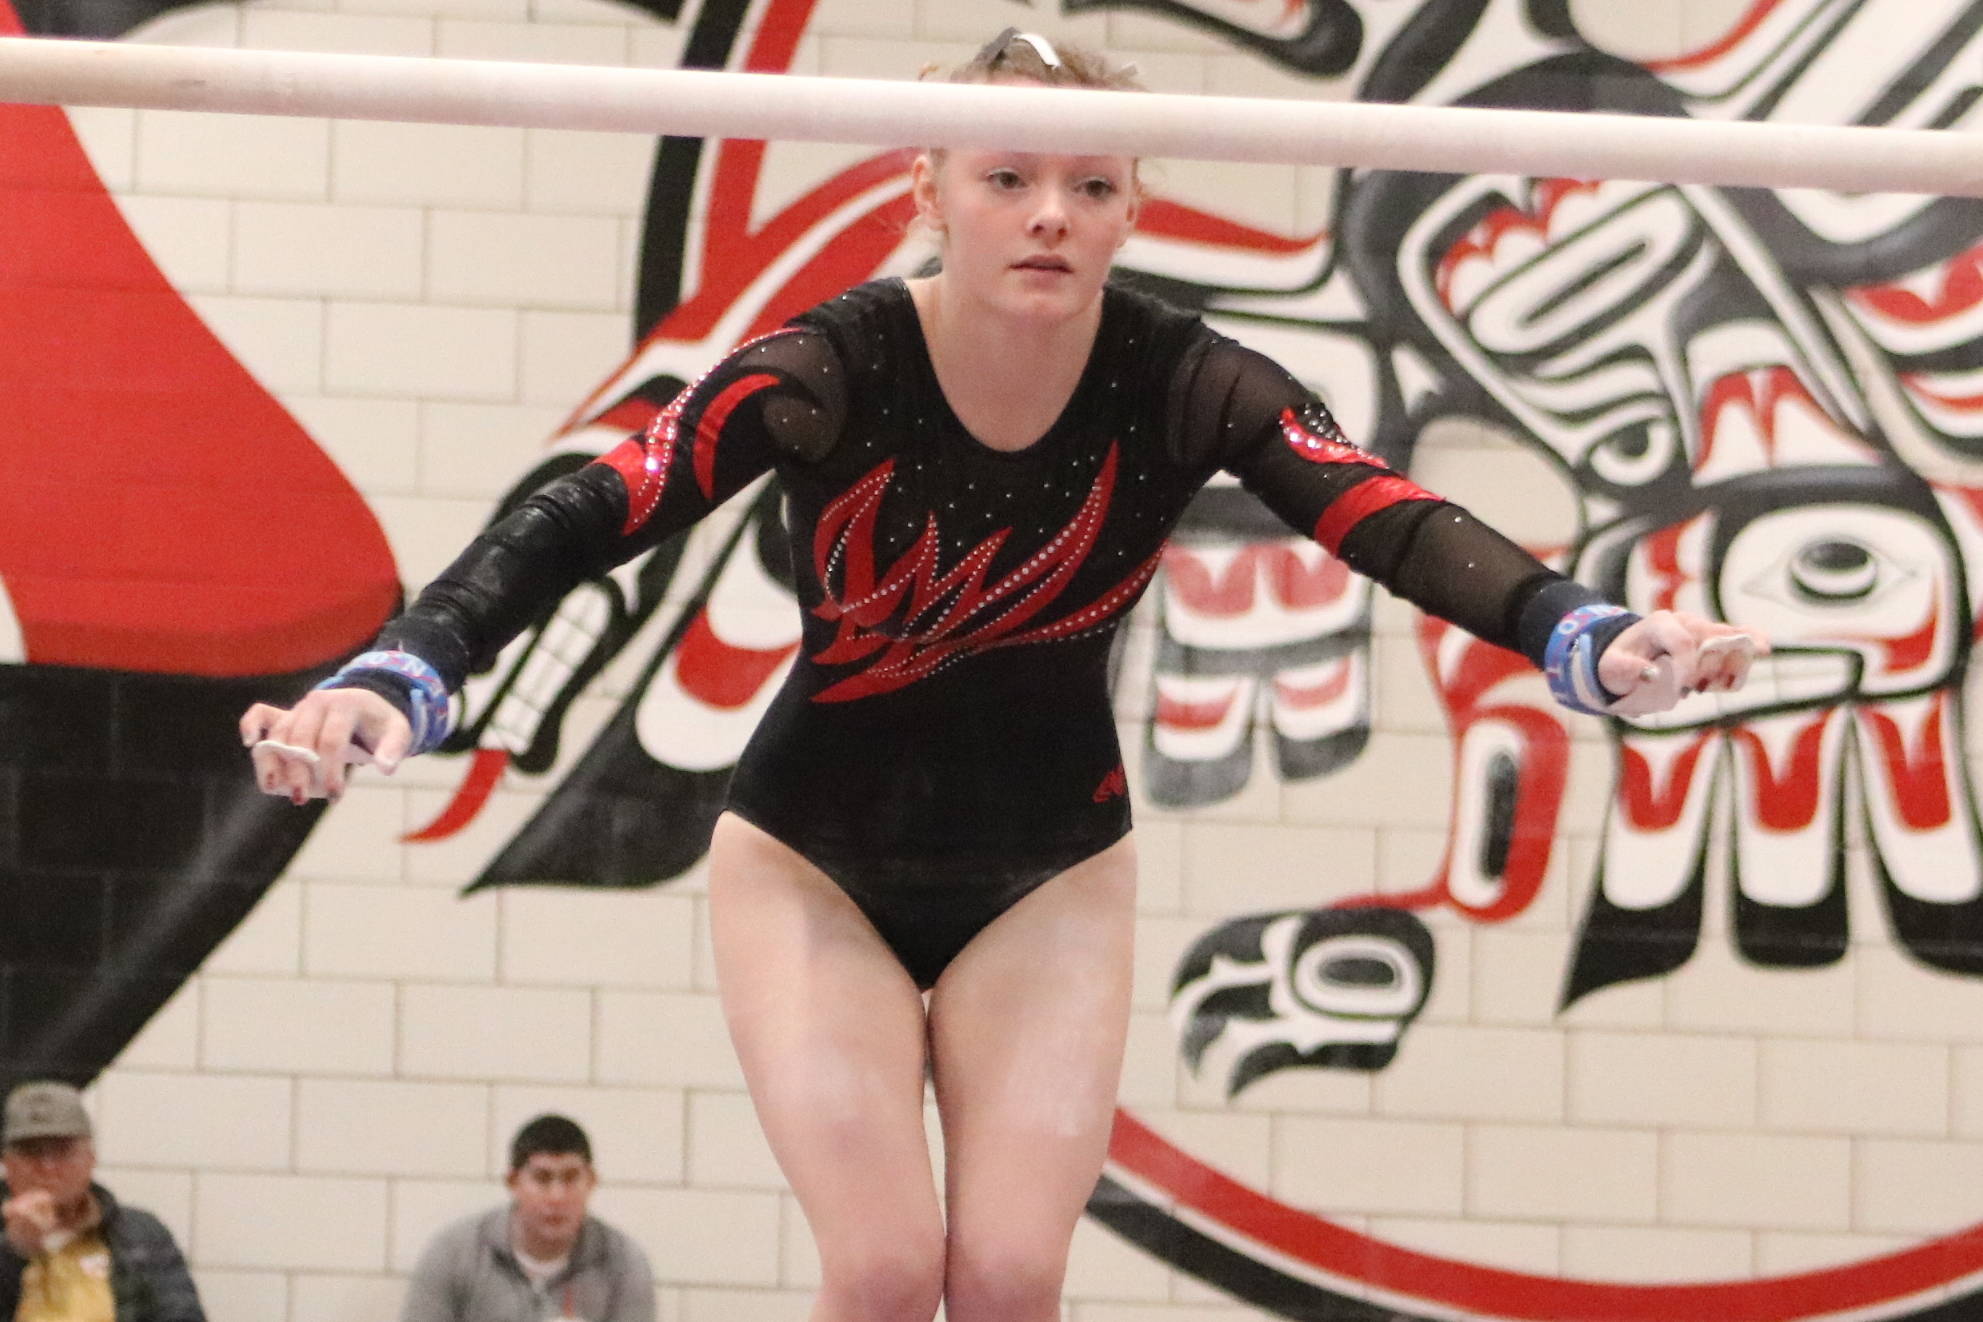 Mount Si’s Zwiefelhofer grips spot in event finals on bars